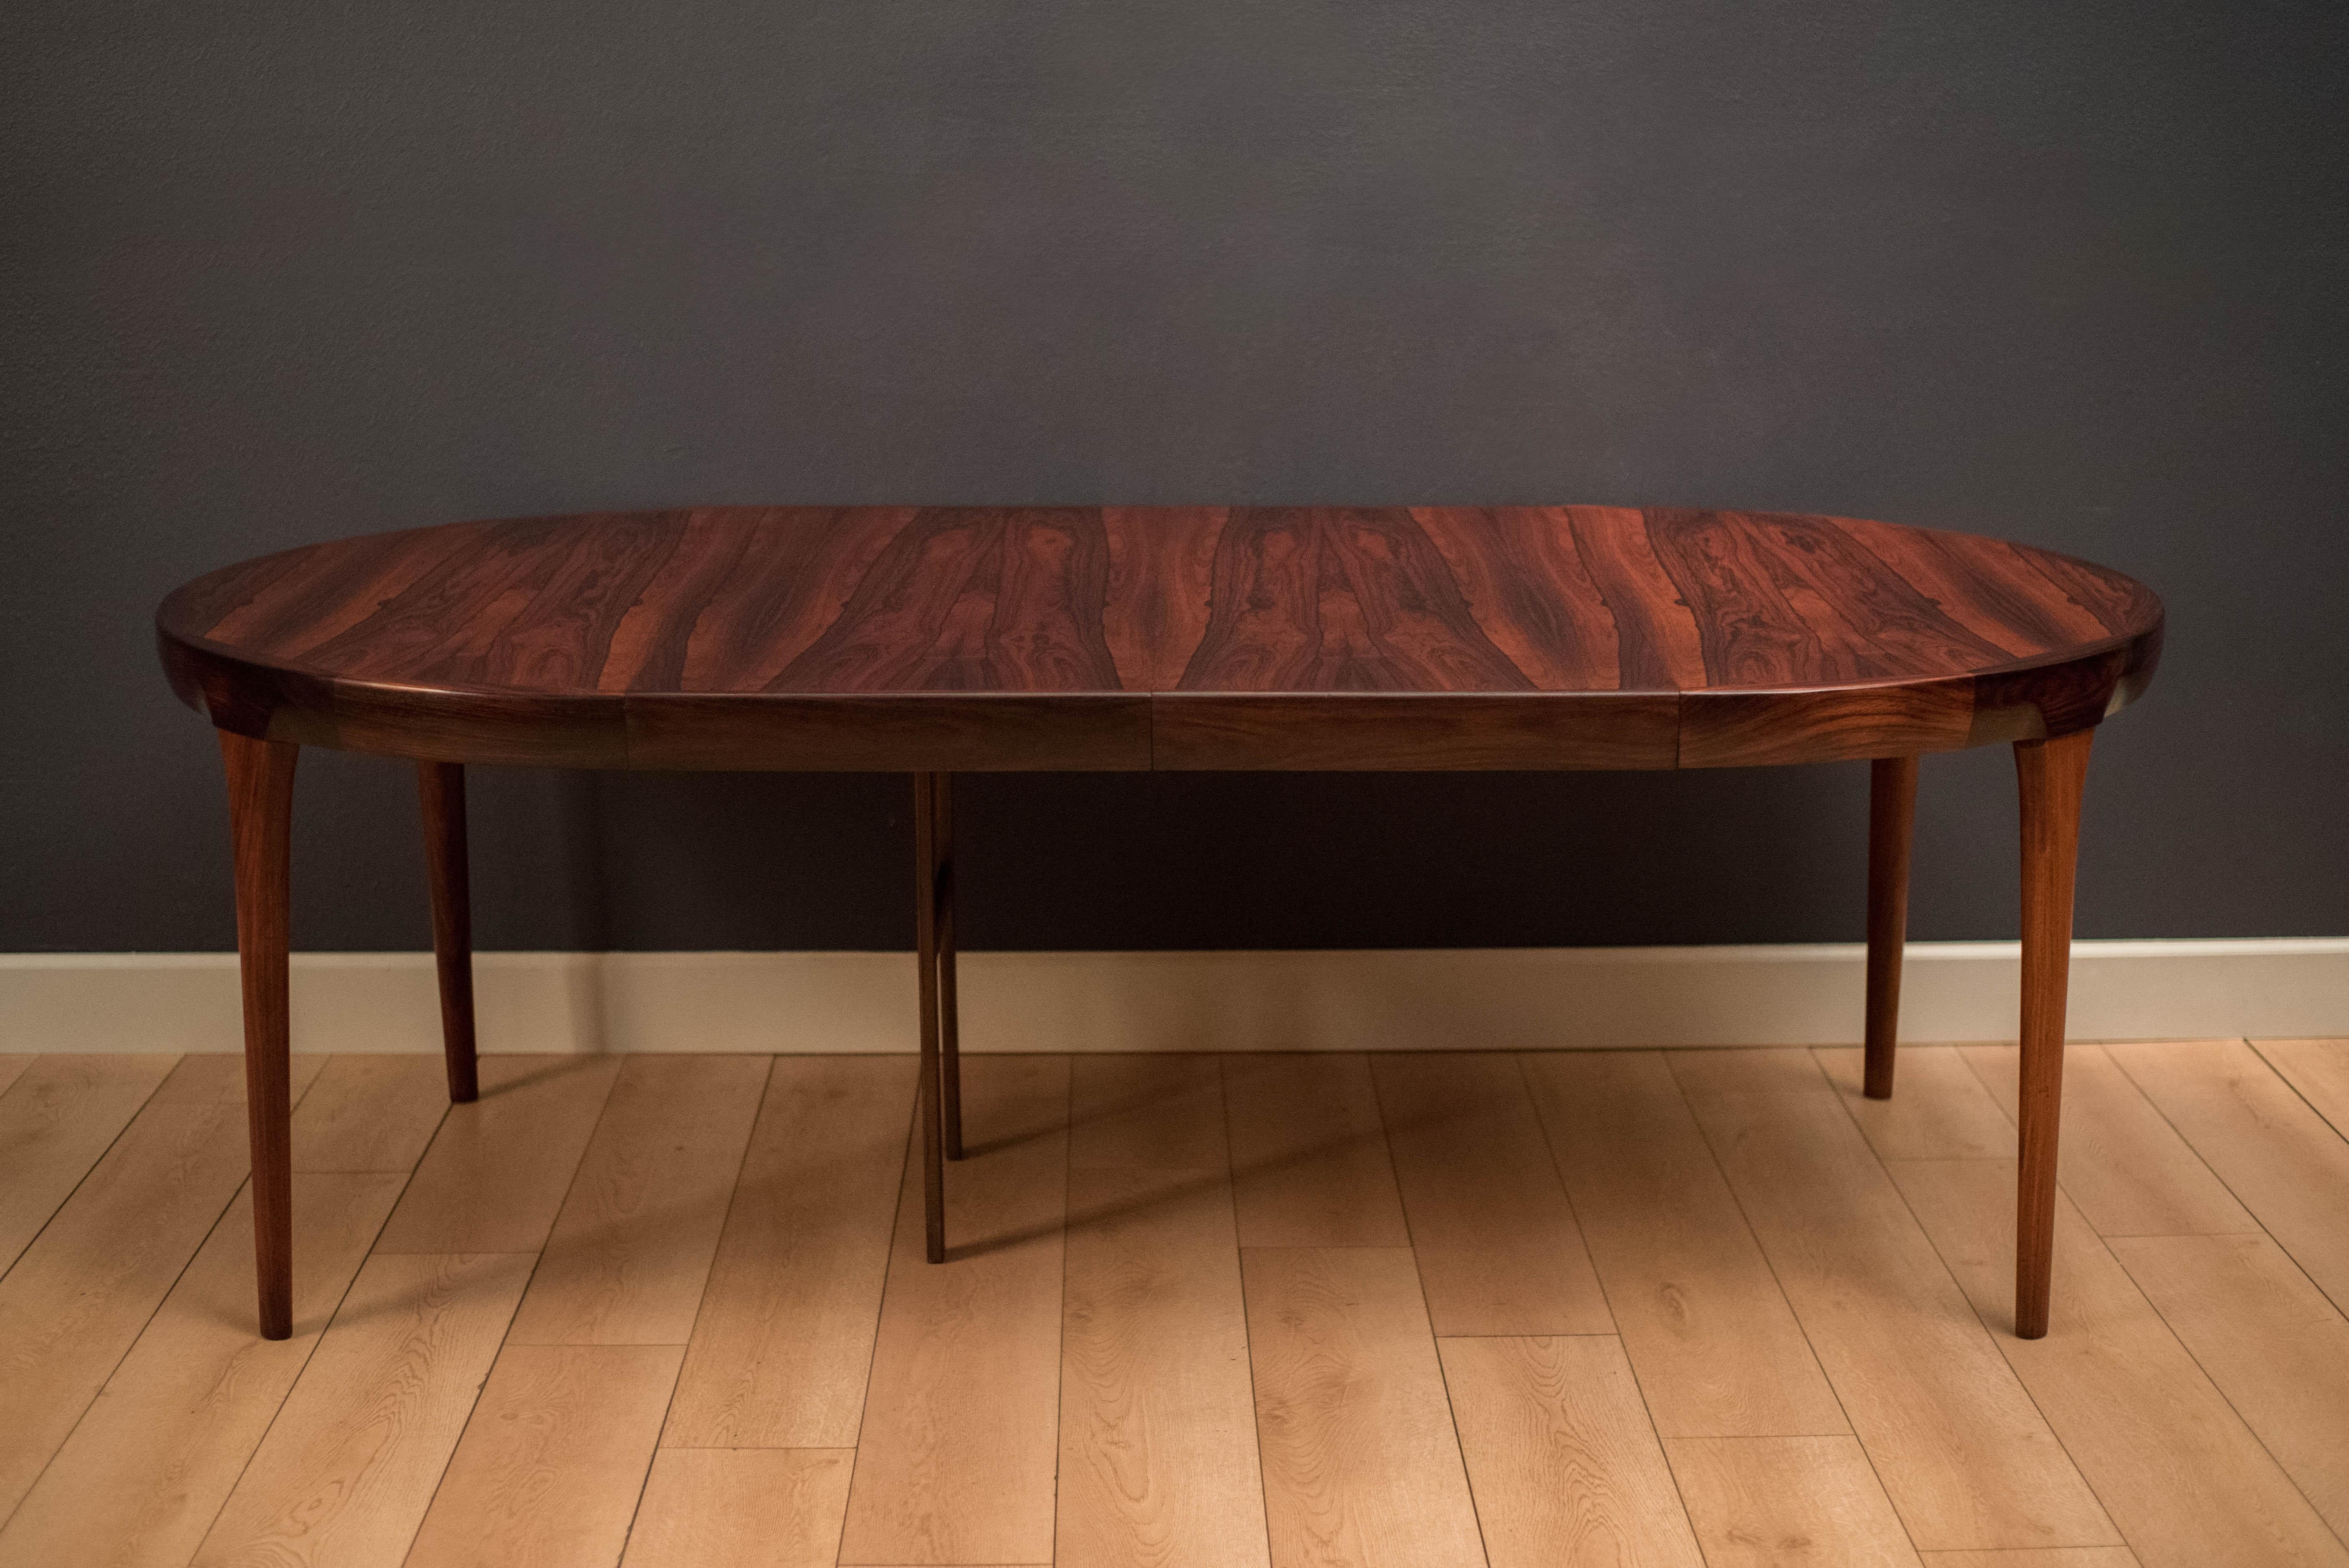 Mid-Century Modern dining table designed by Ib Kofod-Larsen for Faarup Mobelfabrik. This piece displays continuous Brazilian rosewood grains and solid edge banding with a seamless sculpted apron. The table extends with two leaves and can fit up to